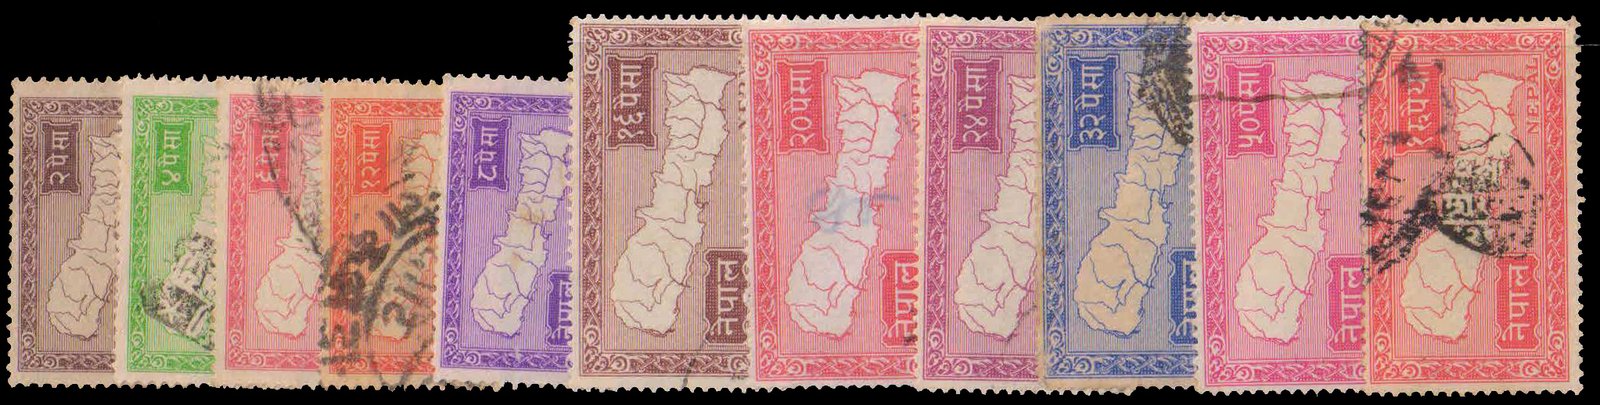 NEPAL 1954-Map of Nepal-2 Pies to 1 Re., Postally Used, 11 Different Stamps, S.G. 85 to 95, Cat £ 36